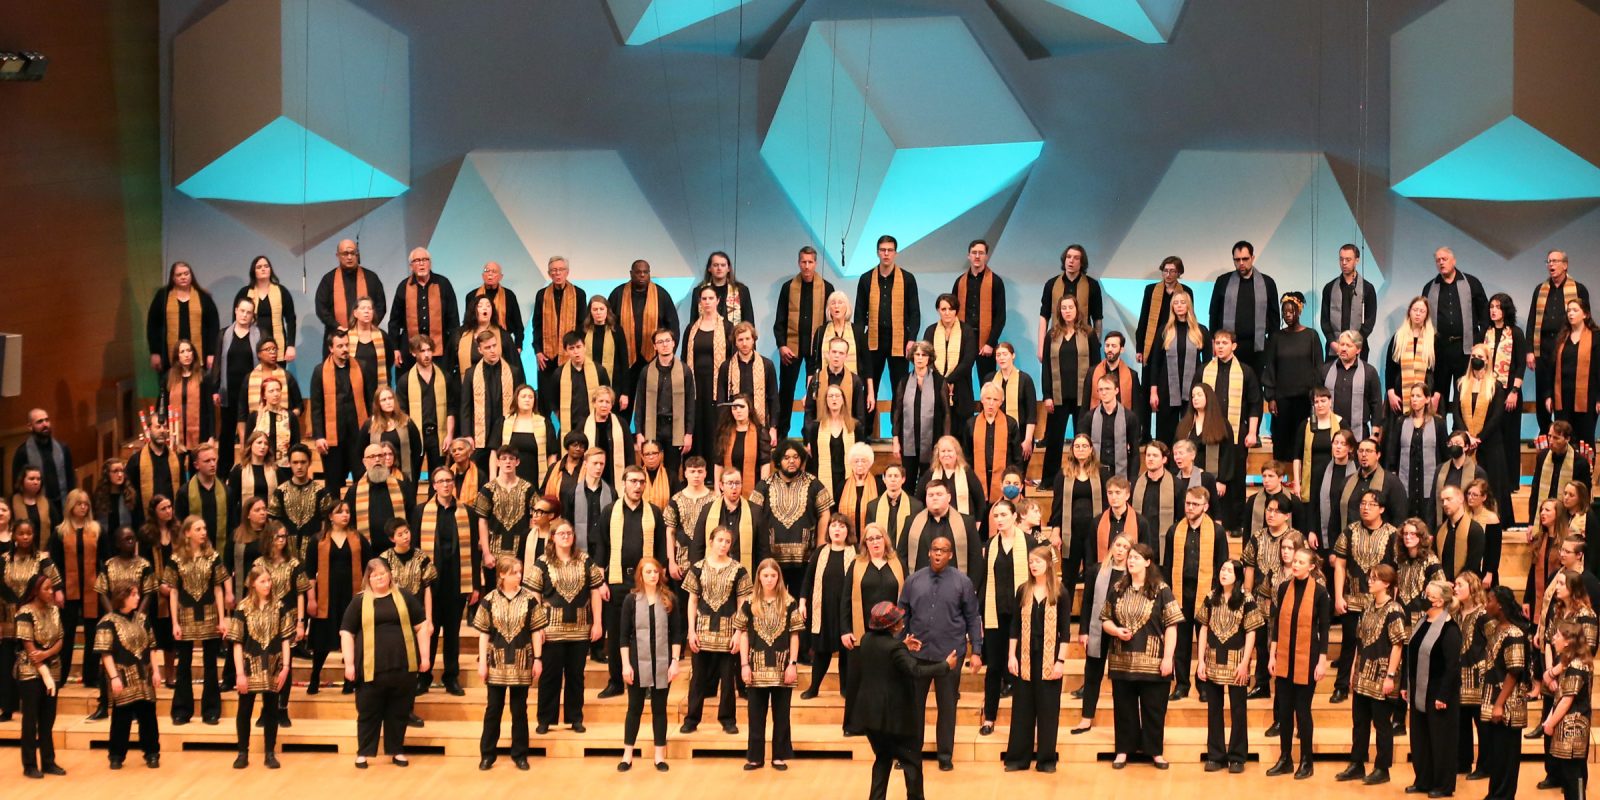 VocalEssence singers wearing black and multicolored stoles perform on stage for the annual WITNESS concert. Photo Credit: Kyndell Harkness